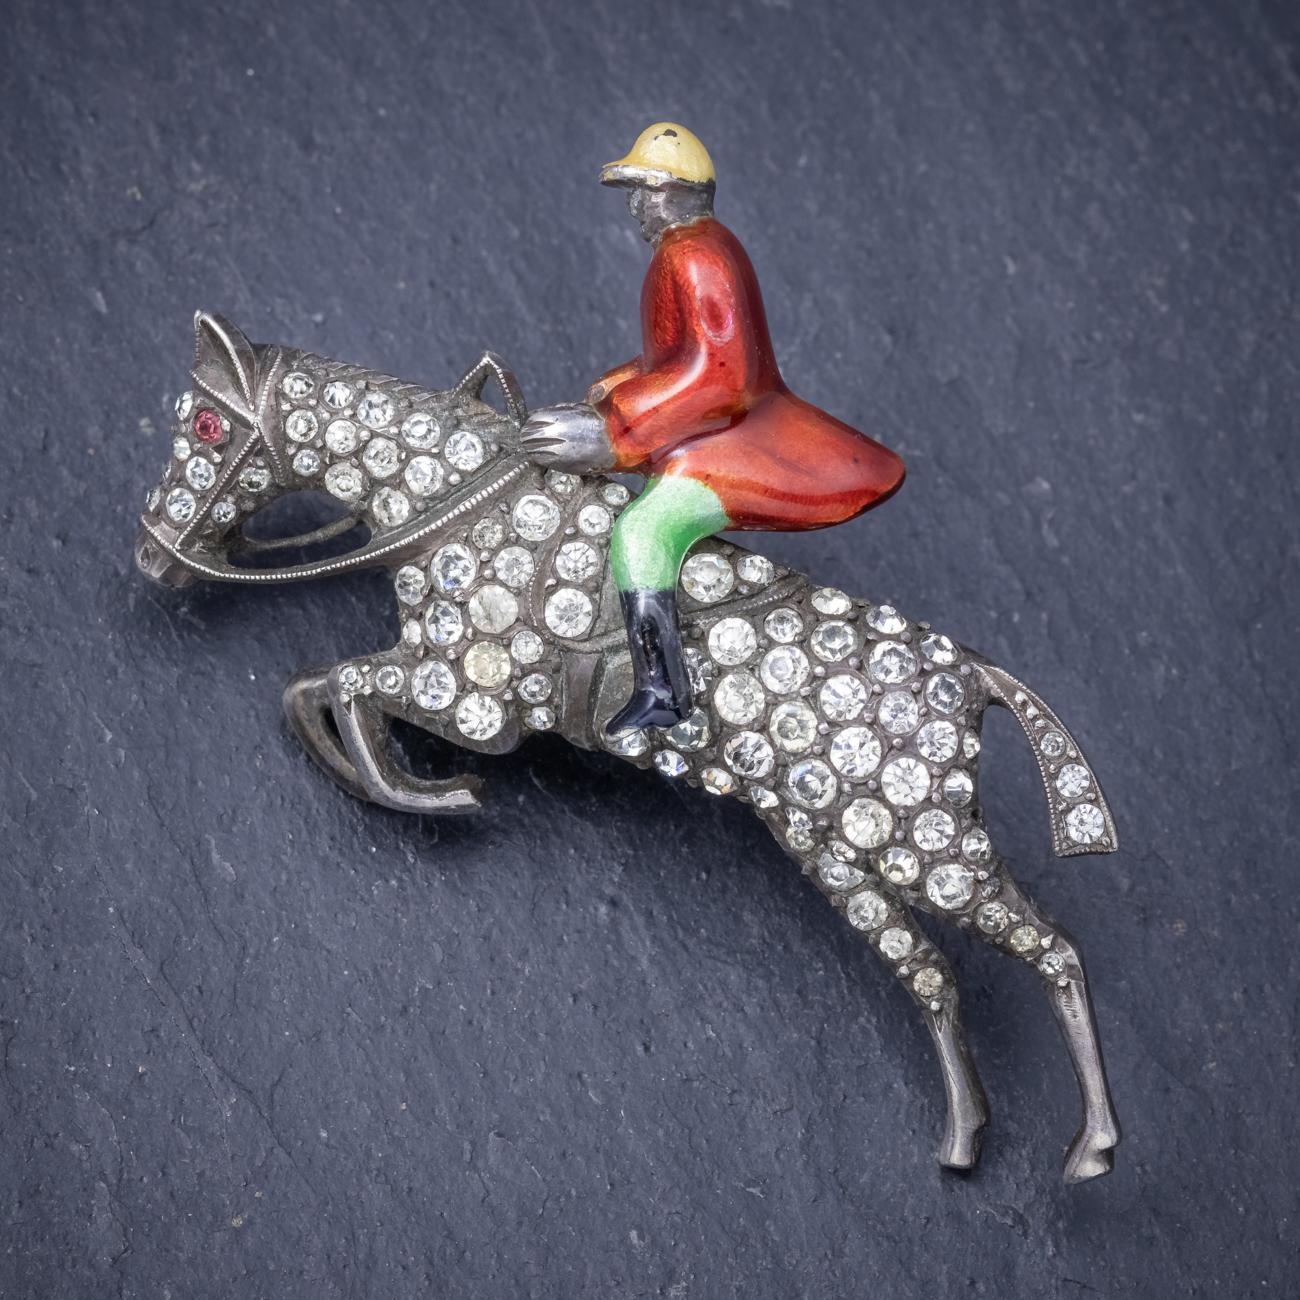 A wonderful antique Victorian riding brooch depicting a horse and rider leaping over an imagined fence. The rider is detailed with a red Enamel jacket, yellow helmet and green jodhpurs. The horse is decorated with white Paste stones which sparkle